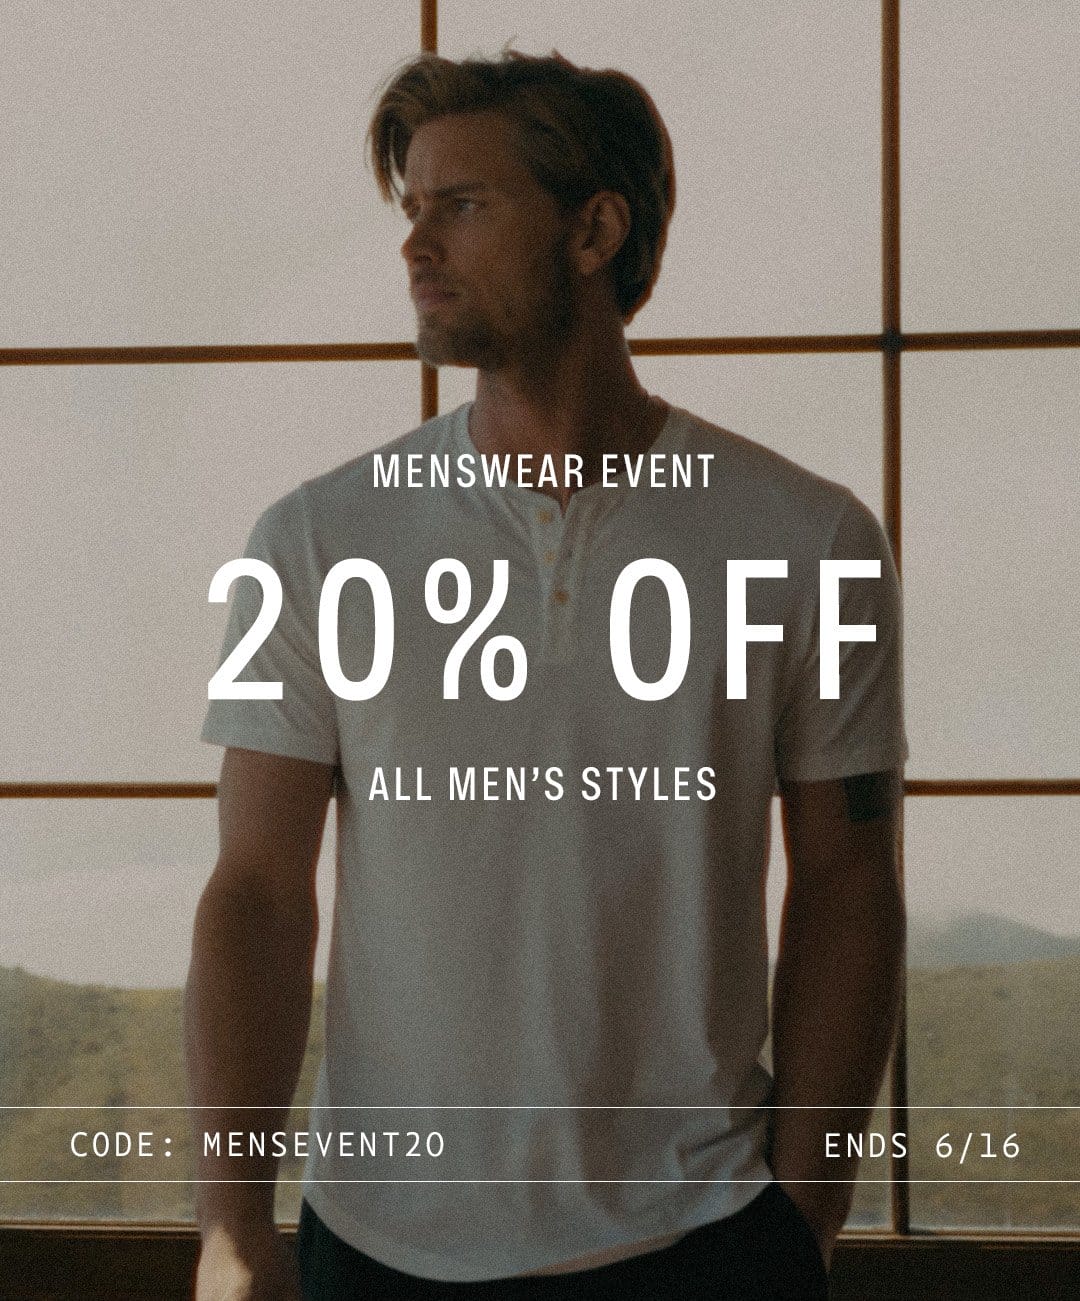 MENSWEAR EVENT ENDS TONIGHT! 20% OFF ALL MEN'S STYLES. CODE: MENSEVENT20